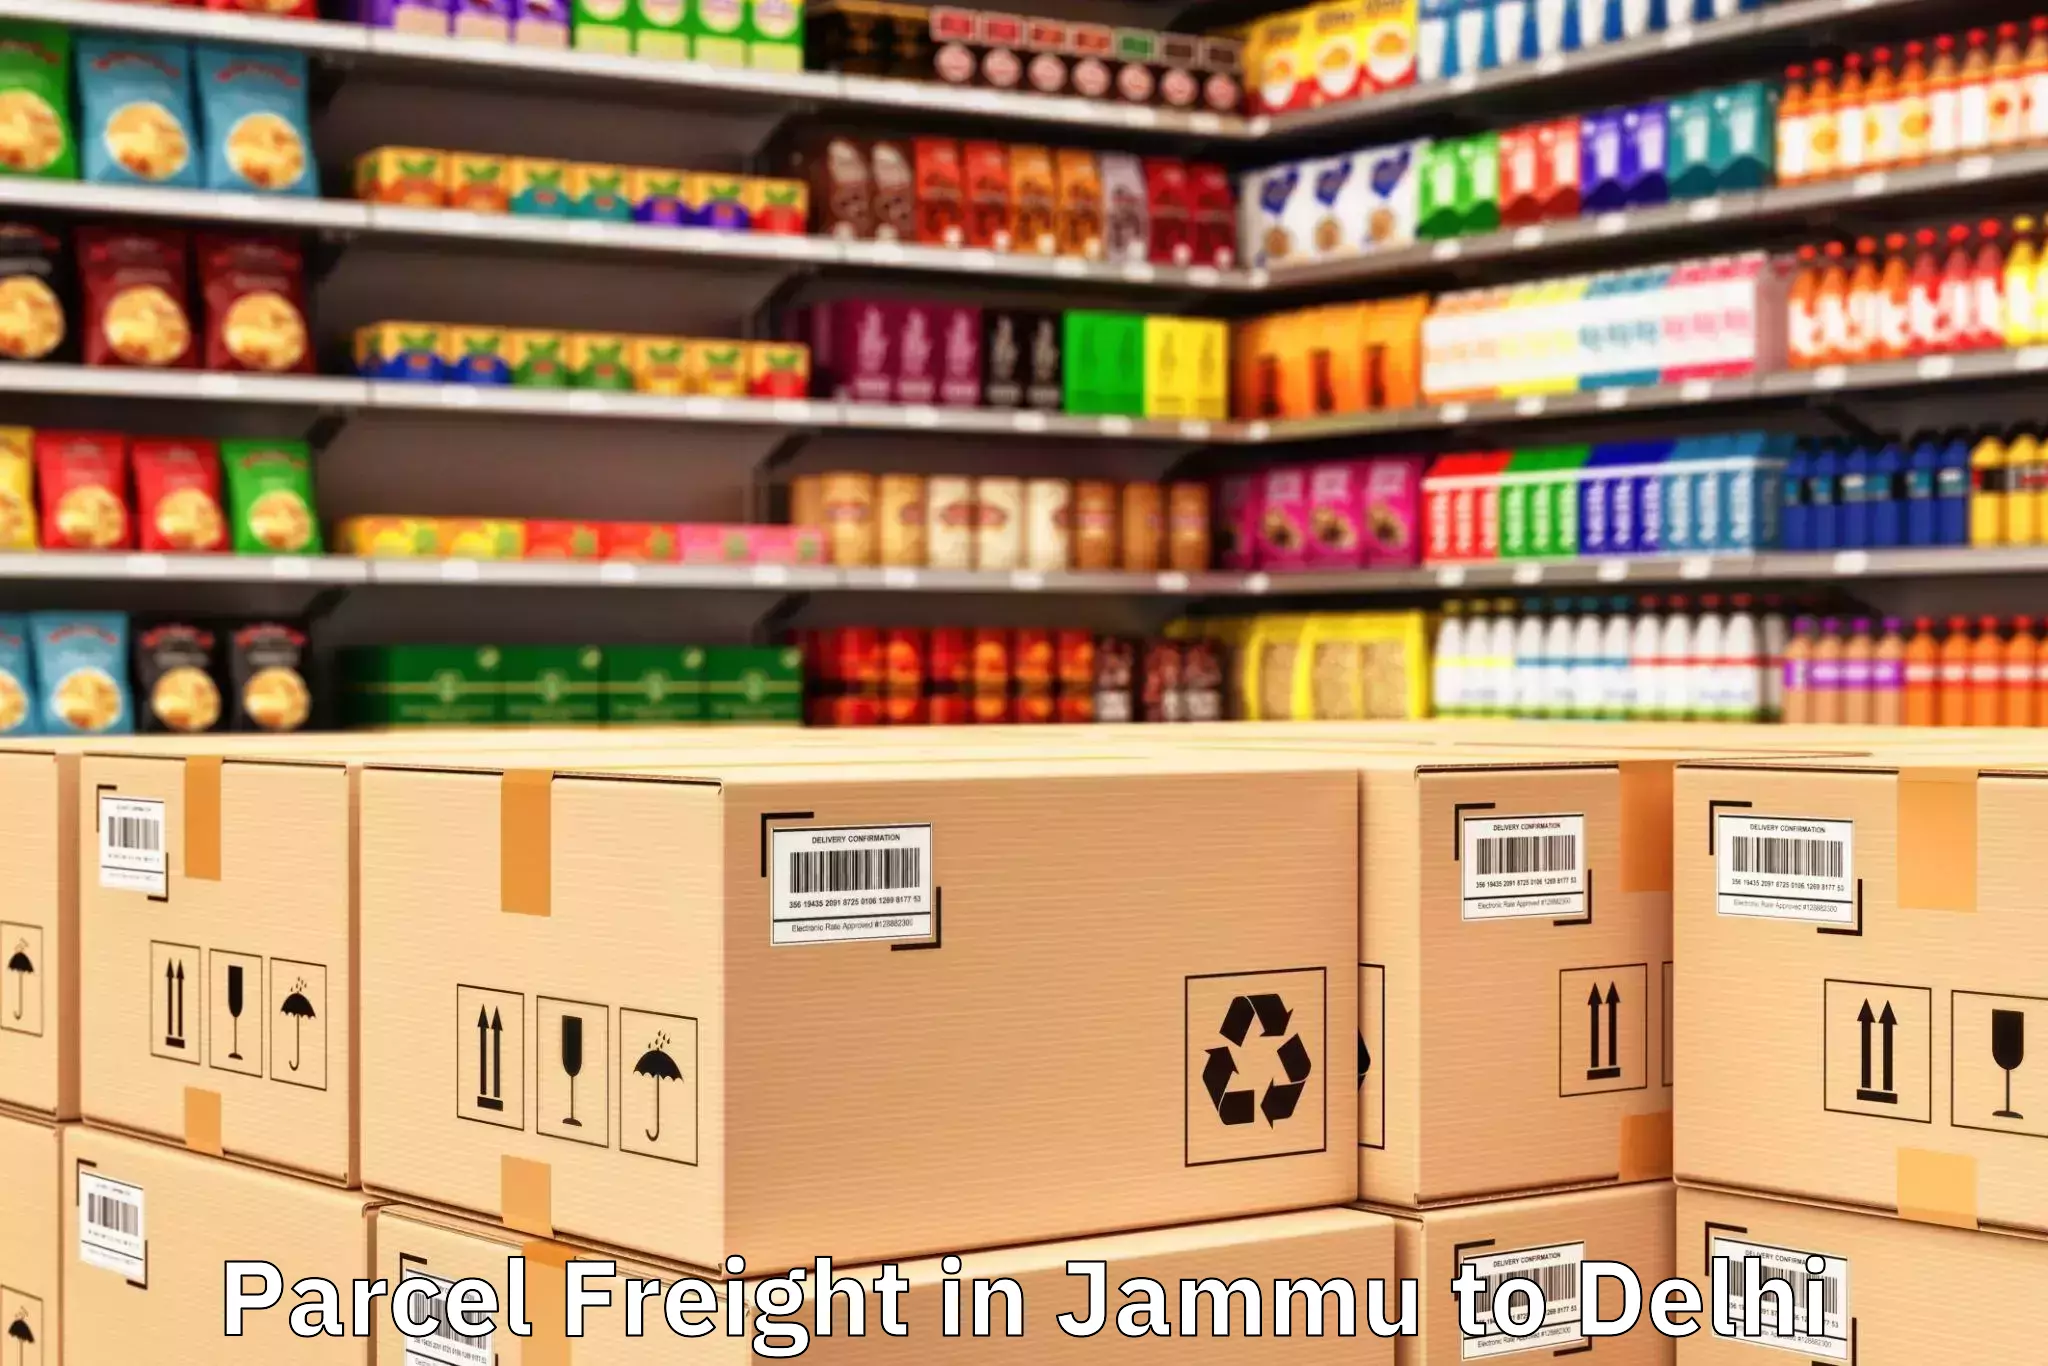 Hassle-Free Jammu to Unity One Mall Cbd Shahdara Parcel Freight